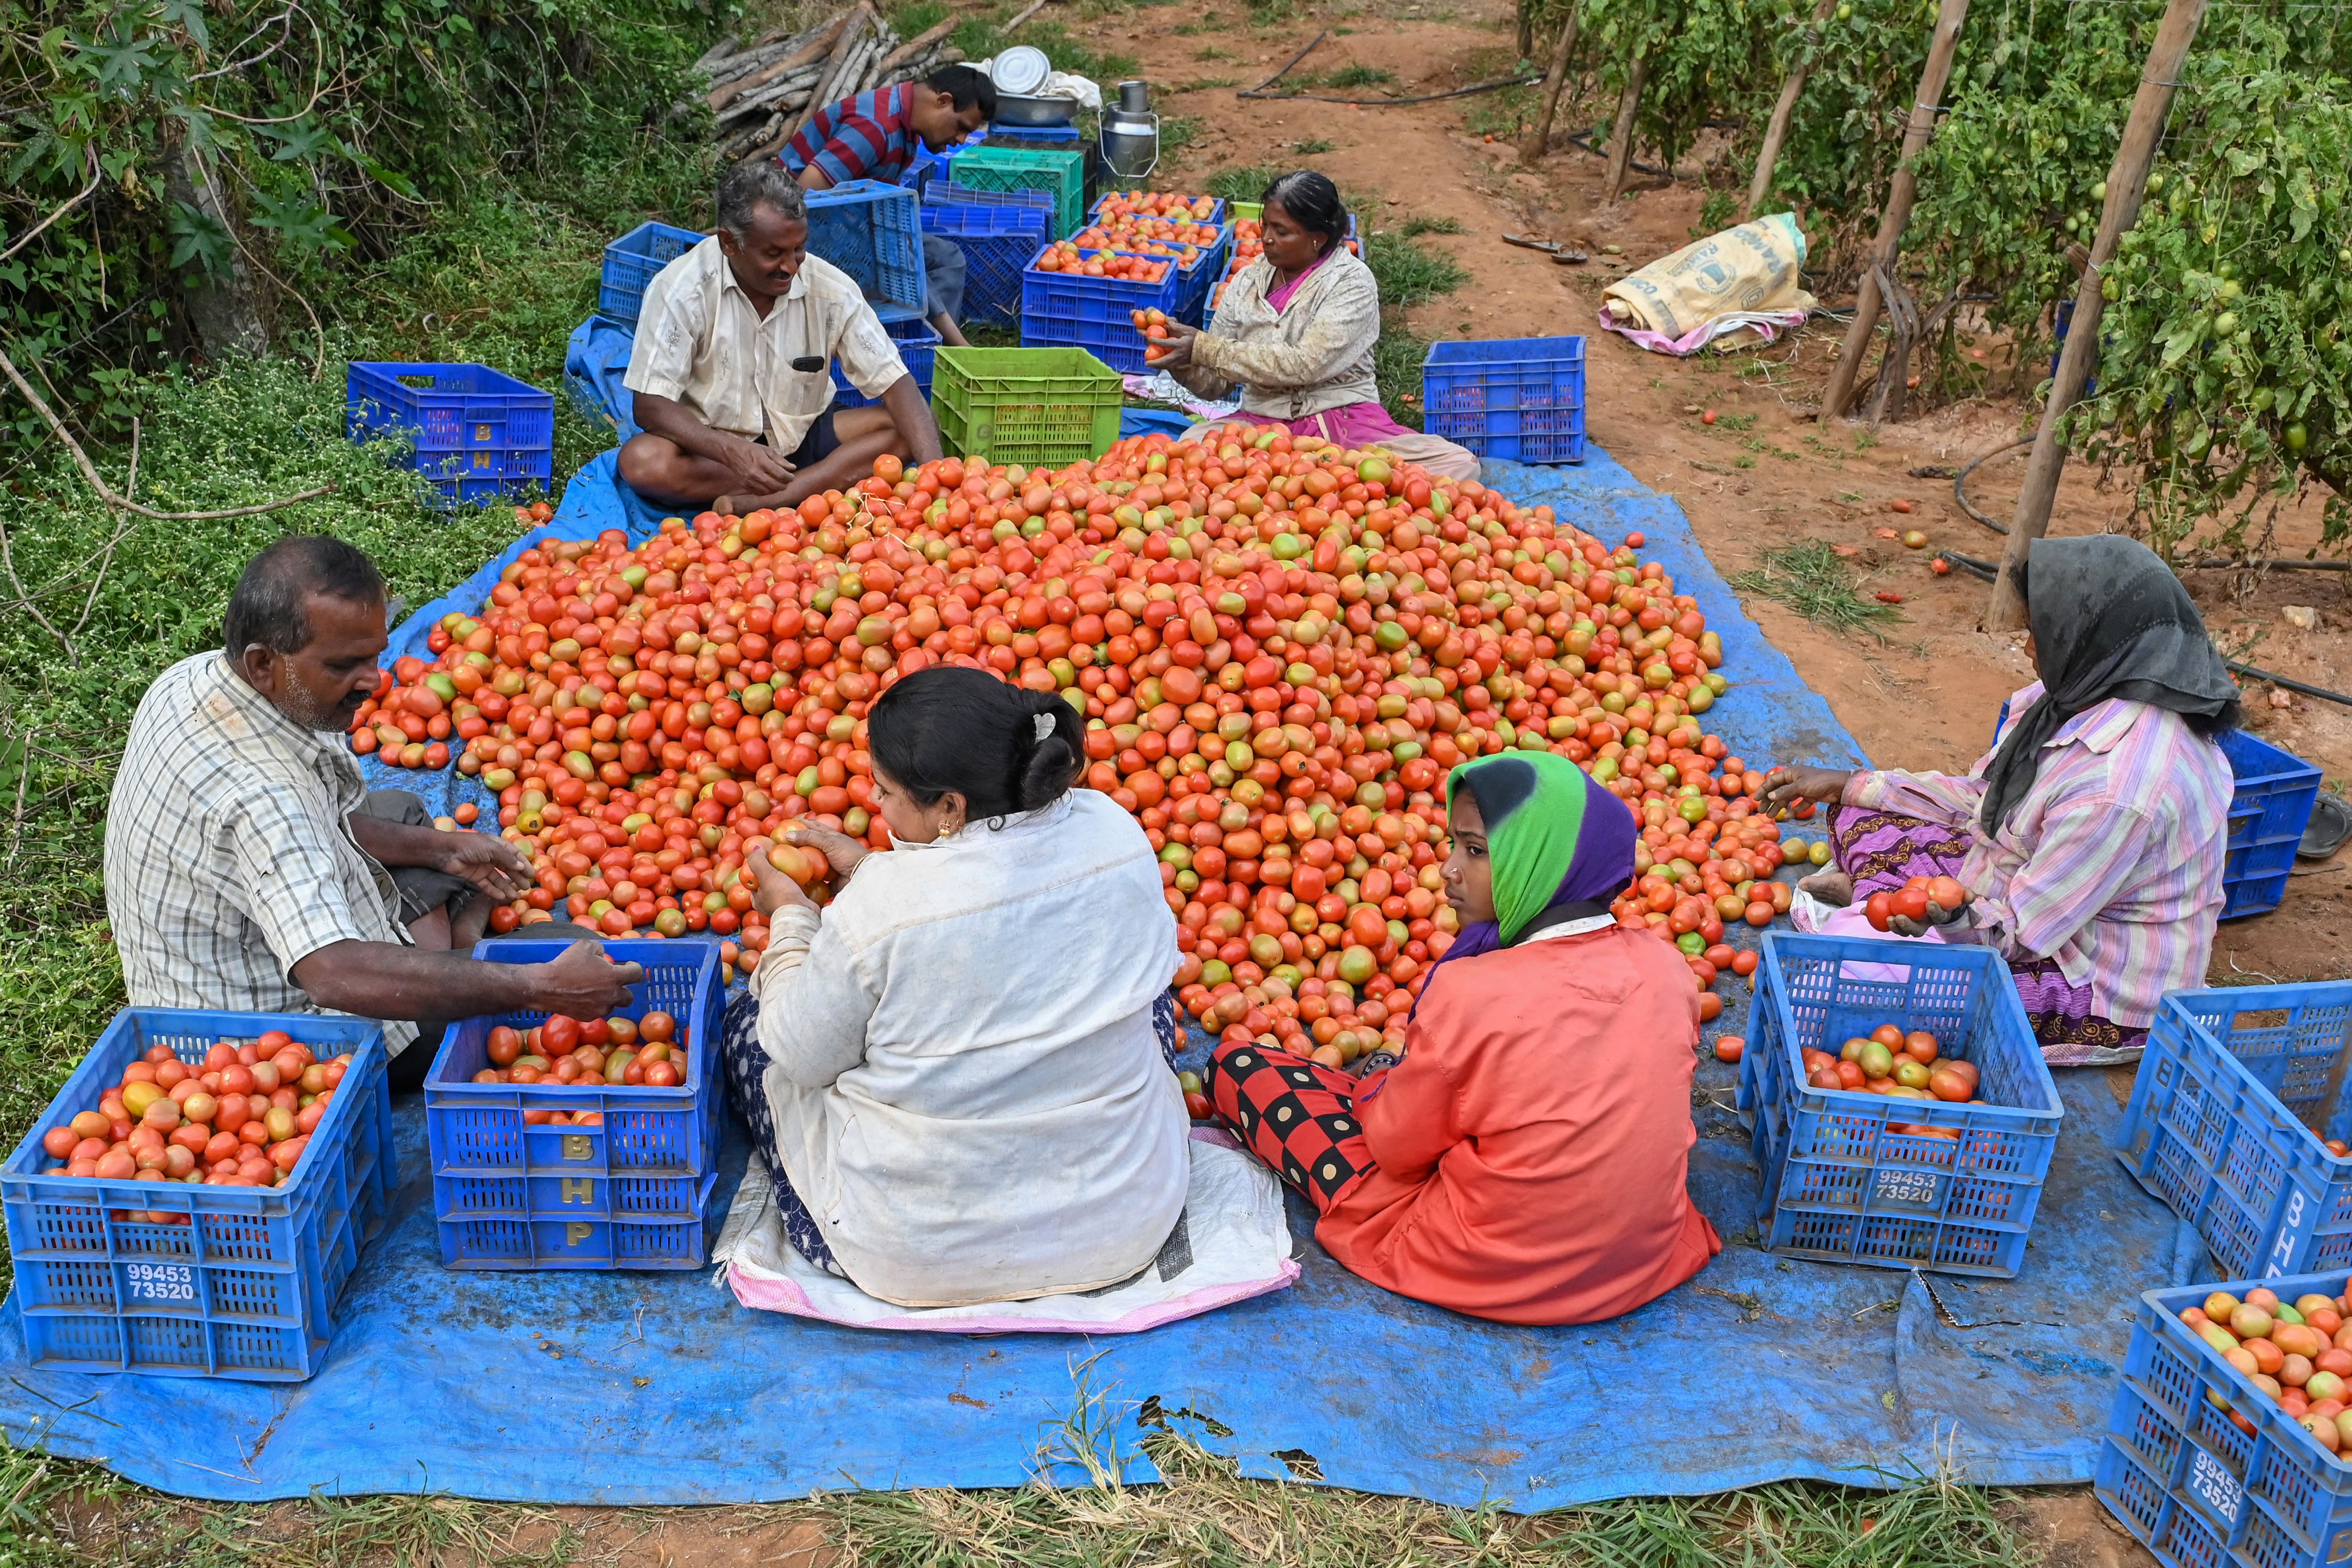 Indians are now travelling to neighbouring country to buy tomatoes after  price skyrockets | The Independent